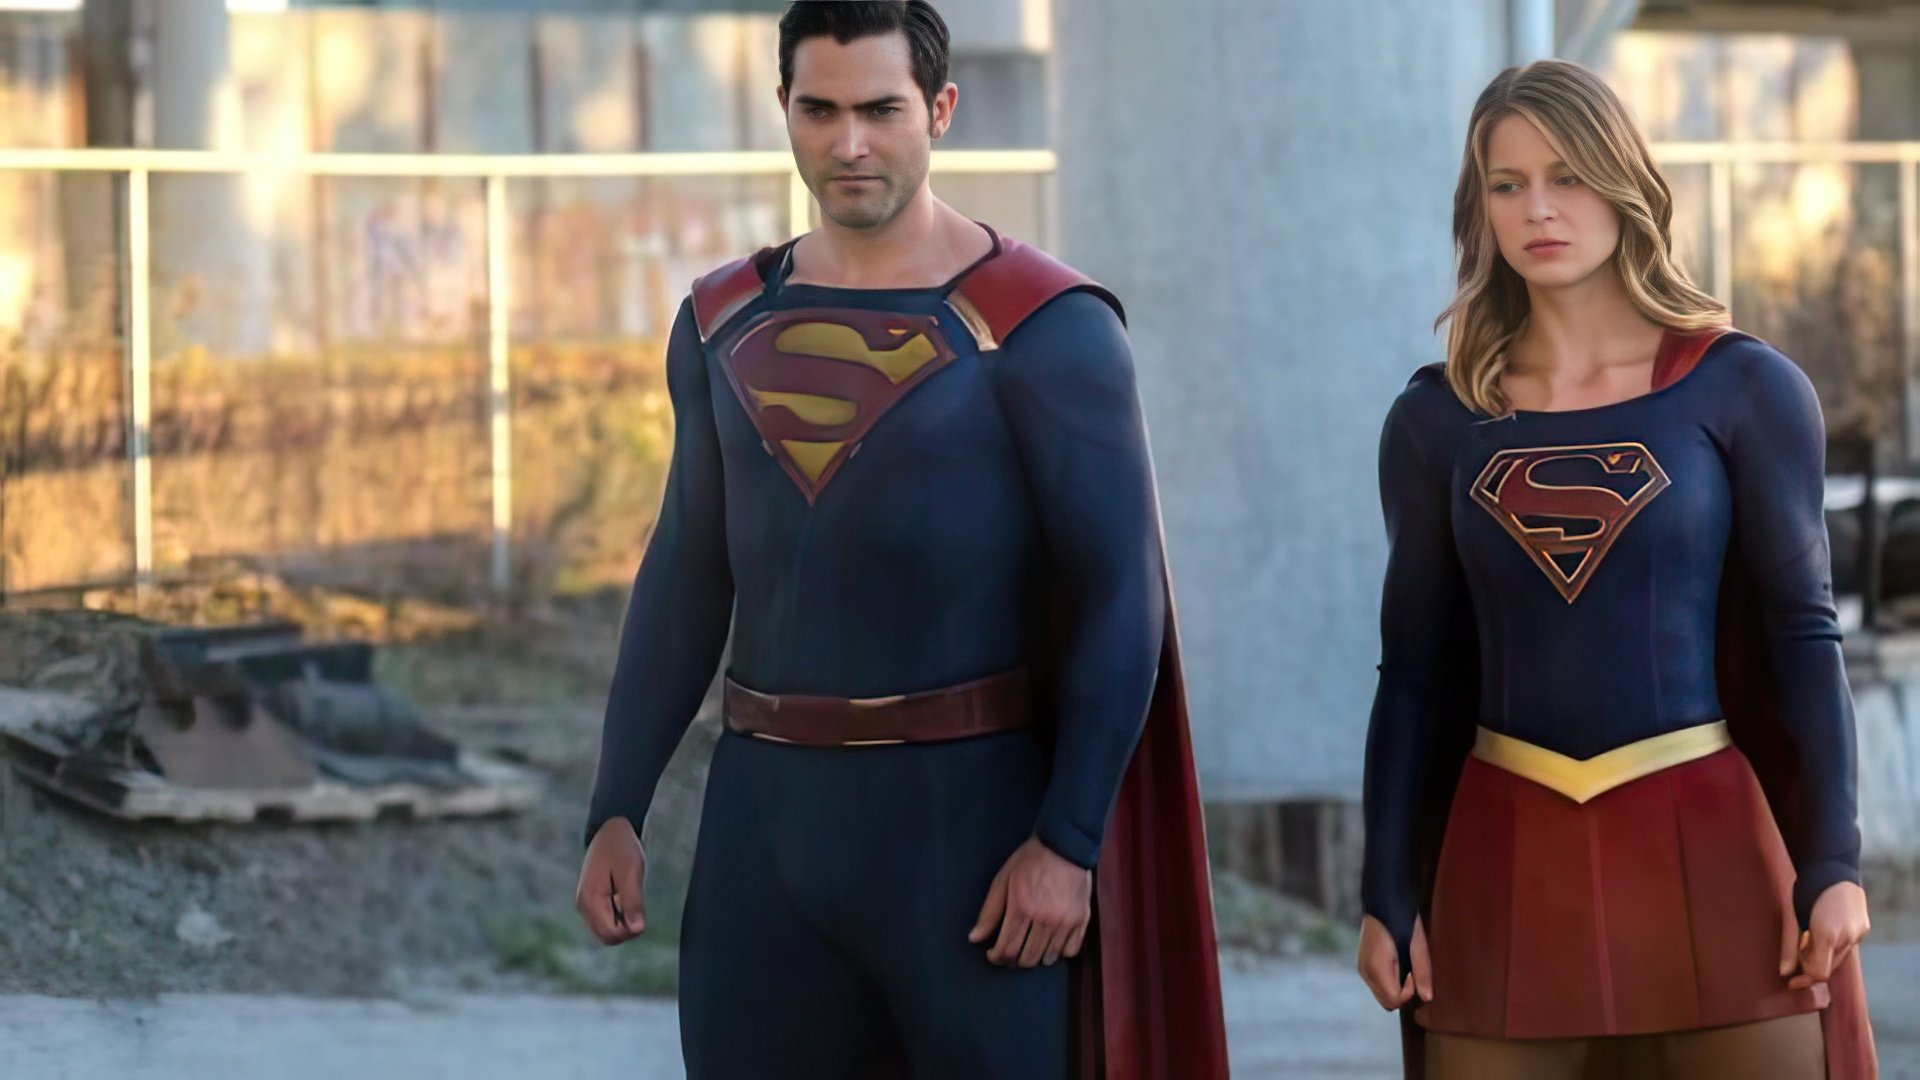 Shot from the TV series Supergirl